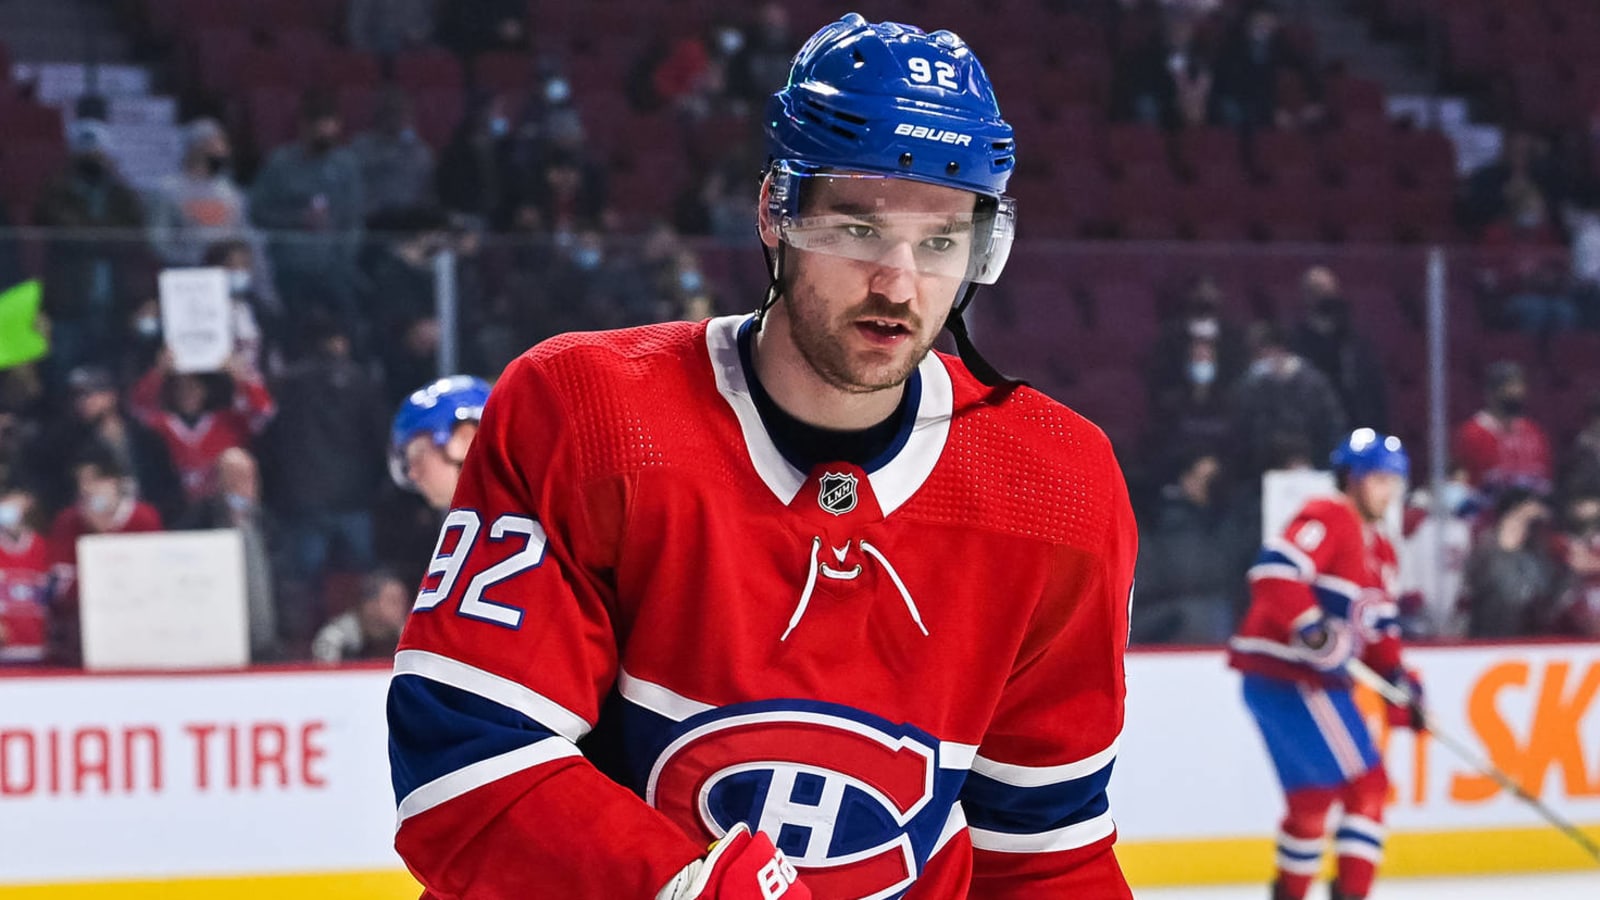 Canadiens provide injury updates on key players